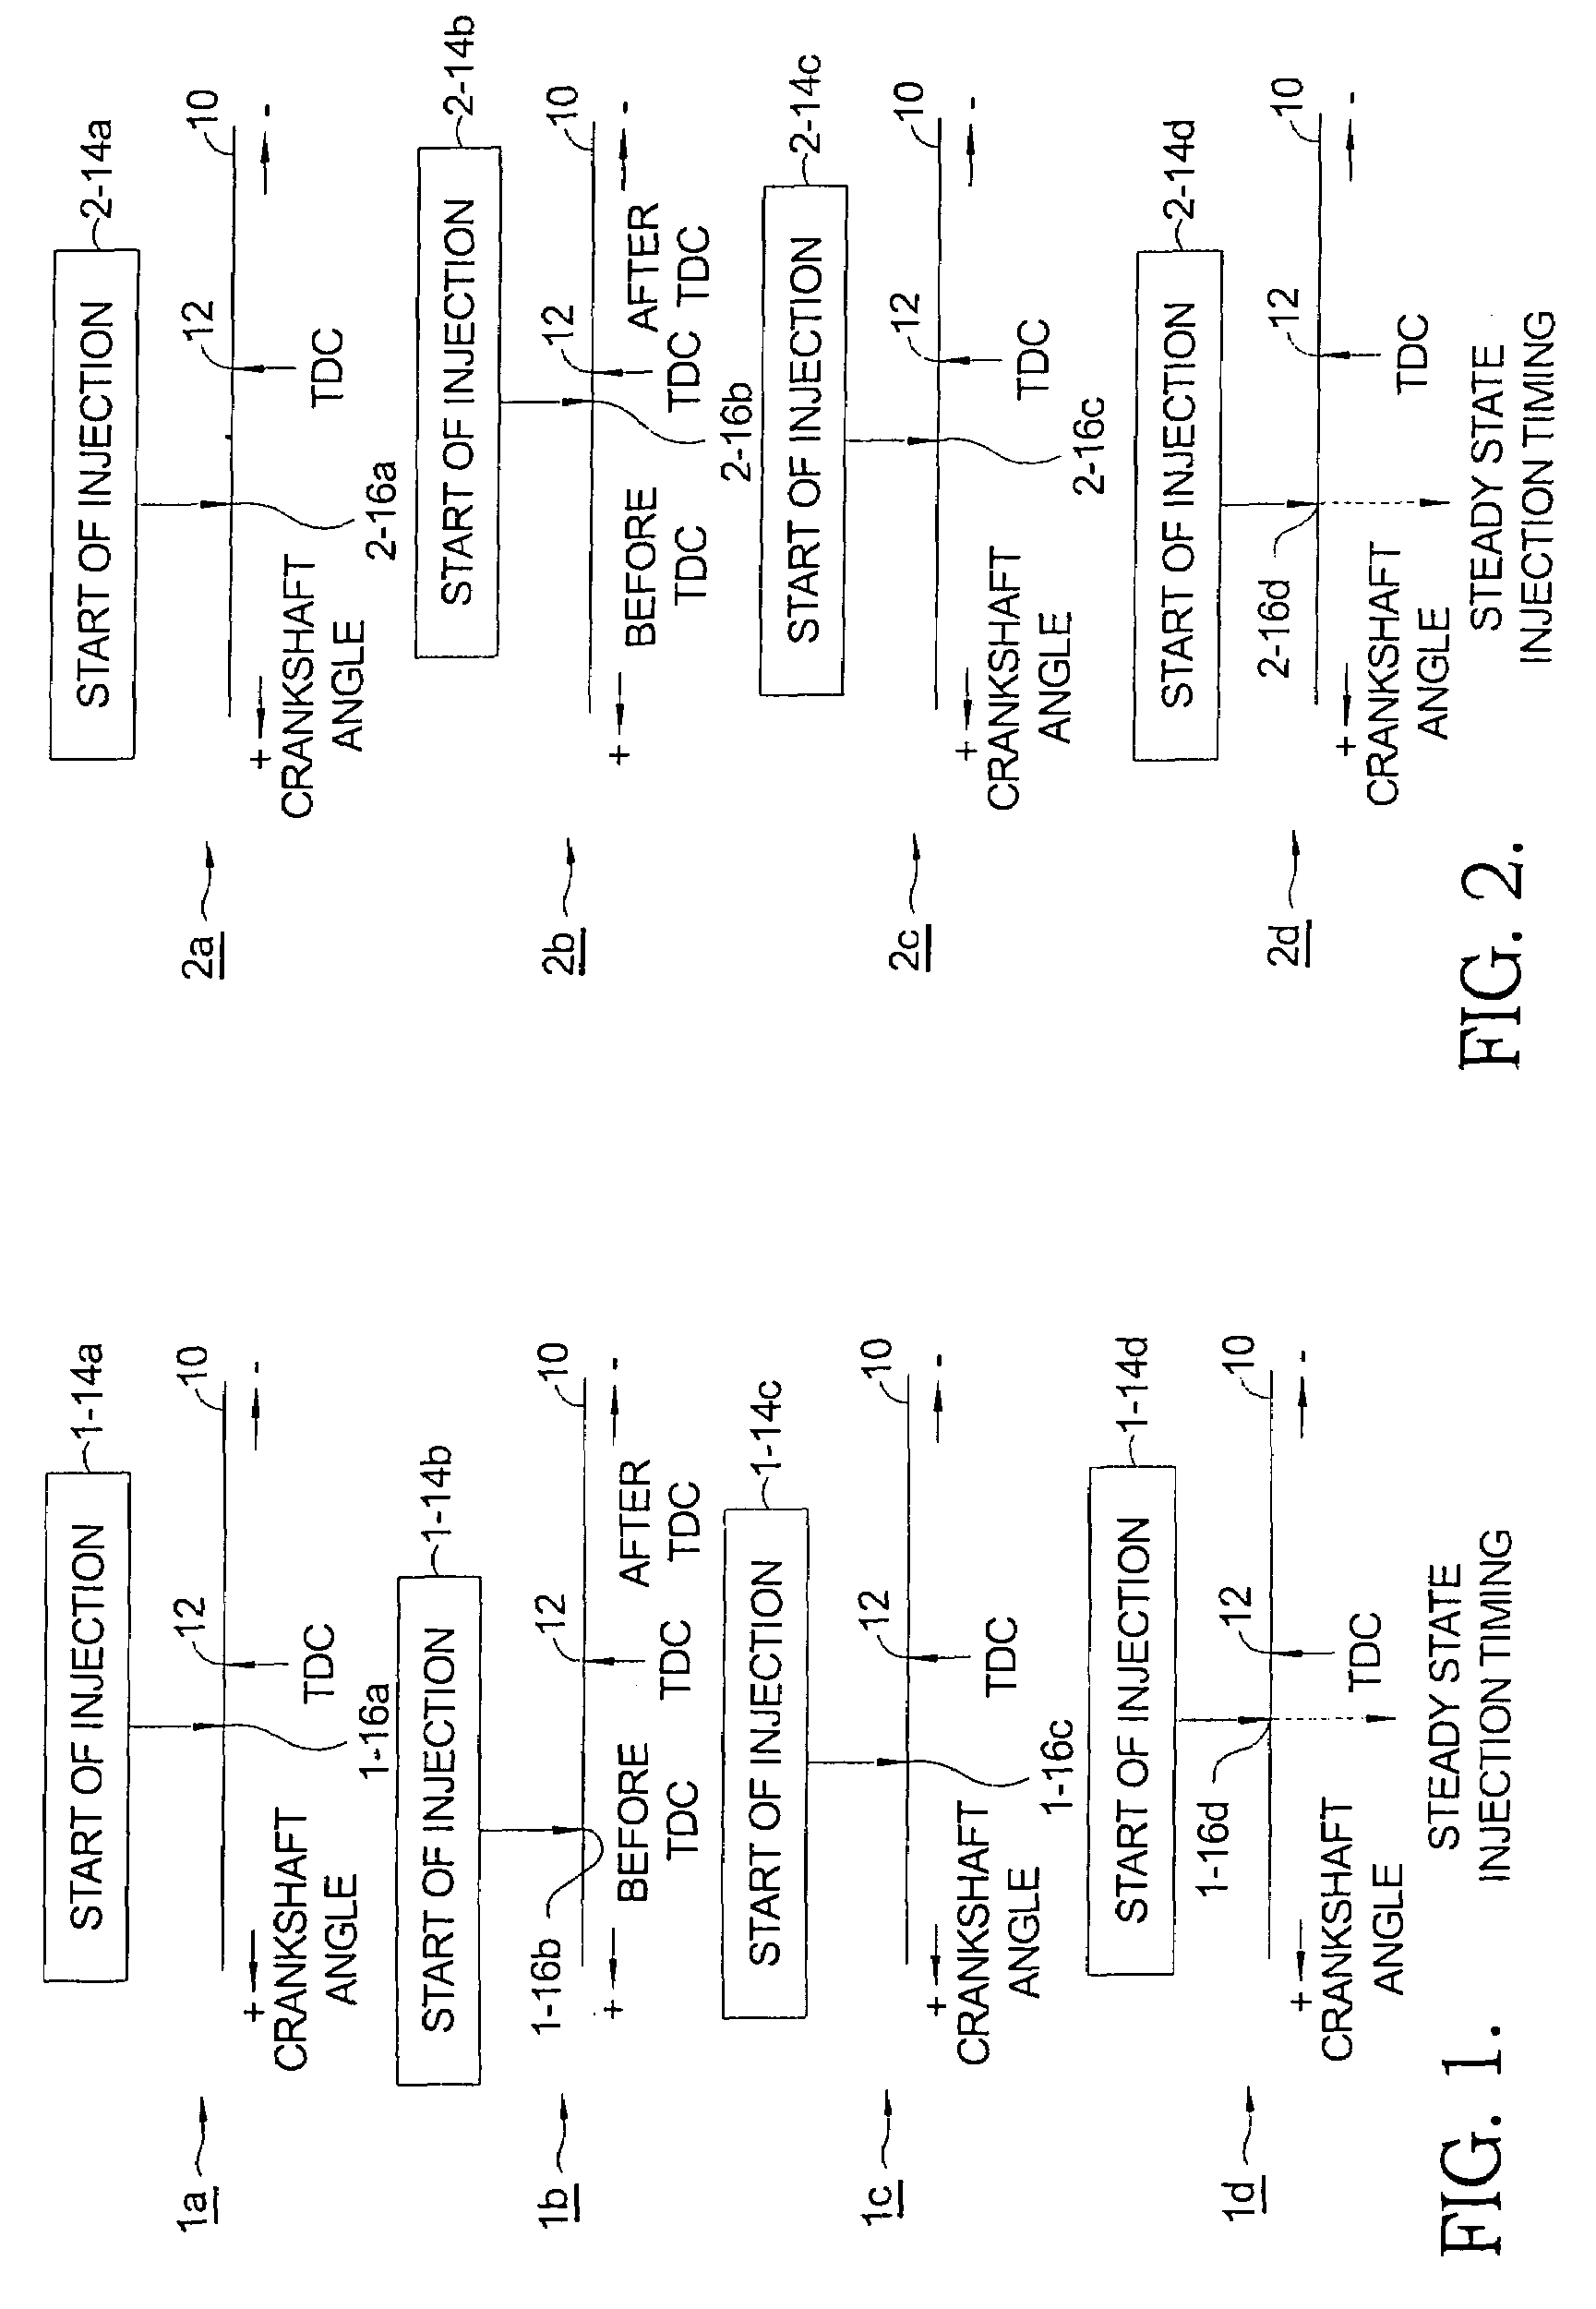 Method for compensating injection timing during transient response of pre-mixed combustion